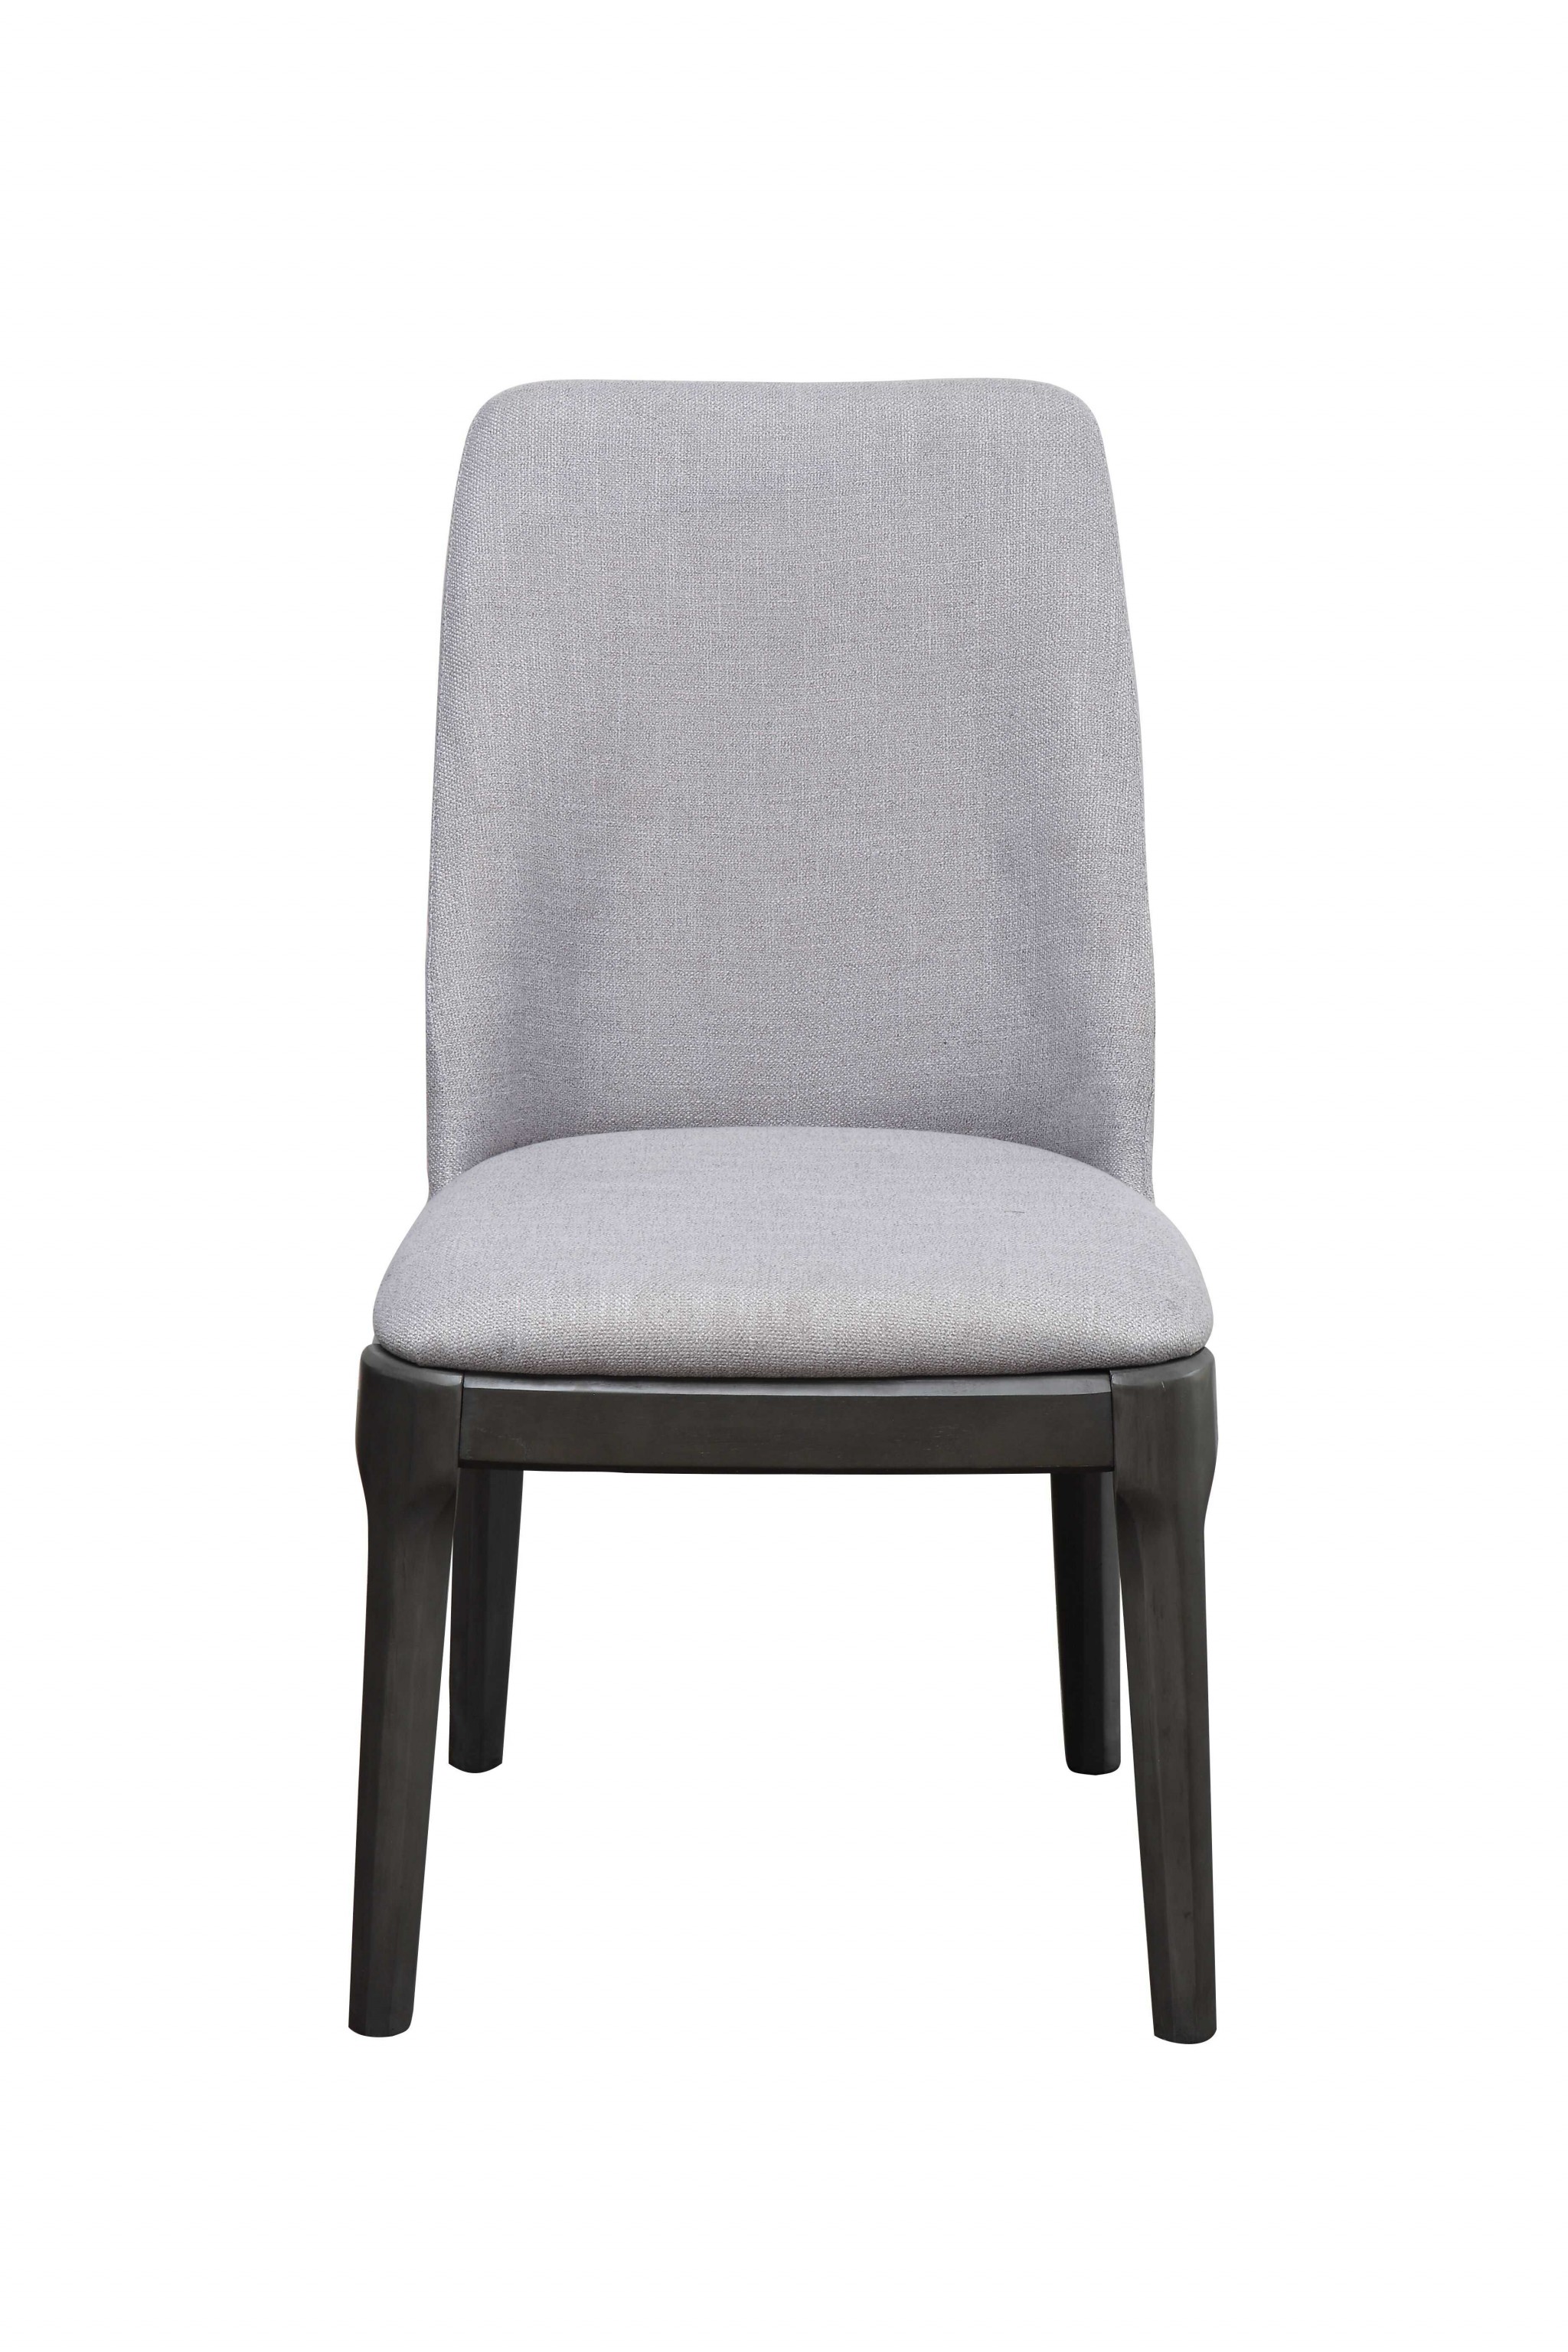 23" X 21" X 39" Light Gray Linen Upholstered Seat and Oak Wood Side Chair